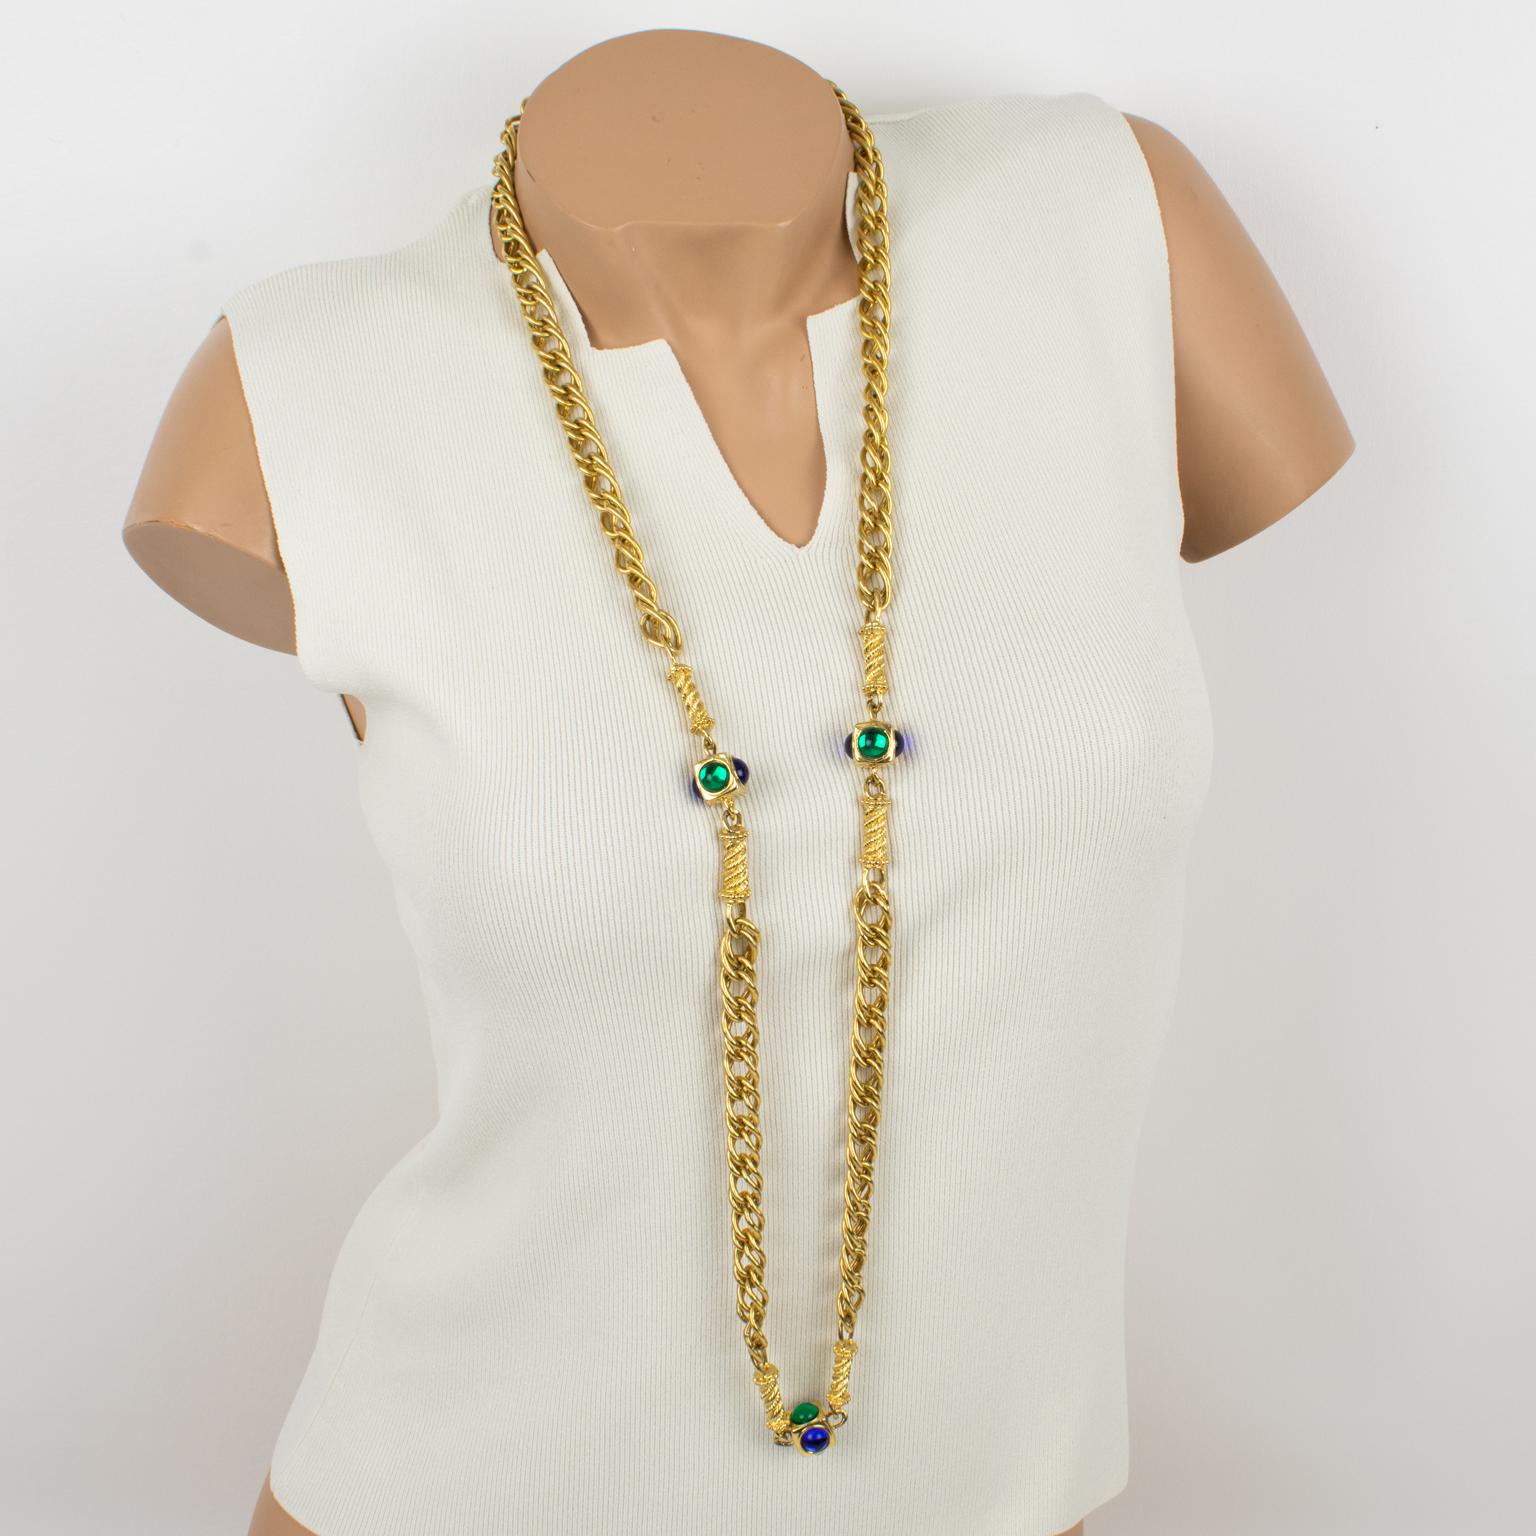 This couture Ungaro Paris long necklace features a heavy satin gilded metal chain, ornate with square elements, topped with cobalt blue and emerald green resin cabochons. The necklace has no clasp and can be easily slipped over the head due to its